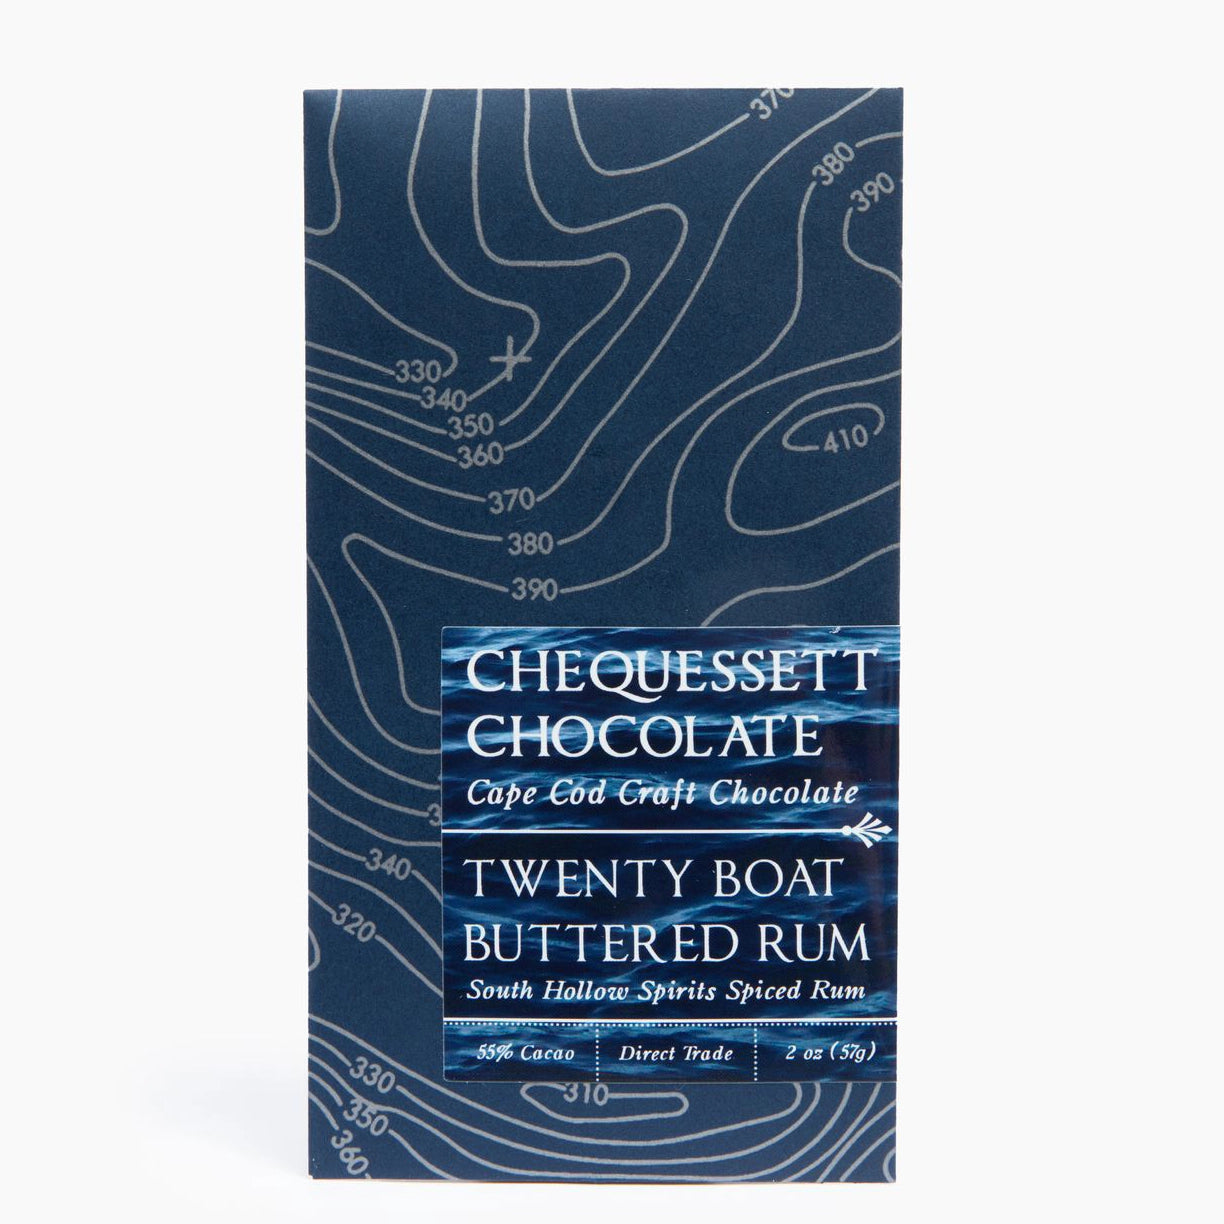 Chequessett Chocolate - 20 Boat Buttered Rum